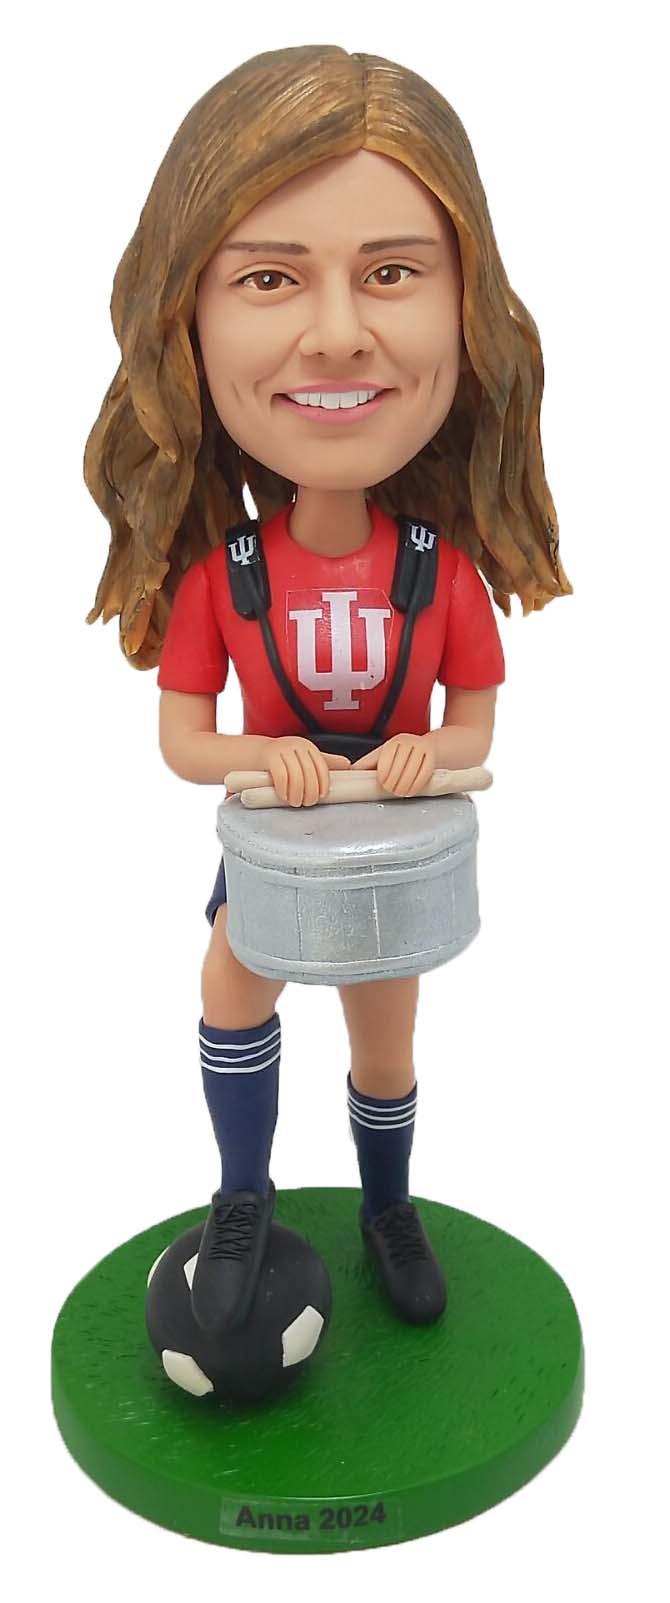 Custom Custom Bobblehead Personalized Bobbleheads Soccer Player with Drum